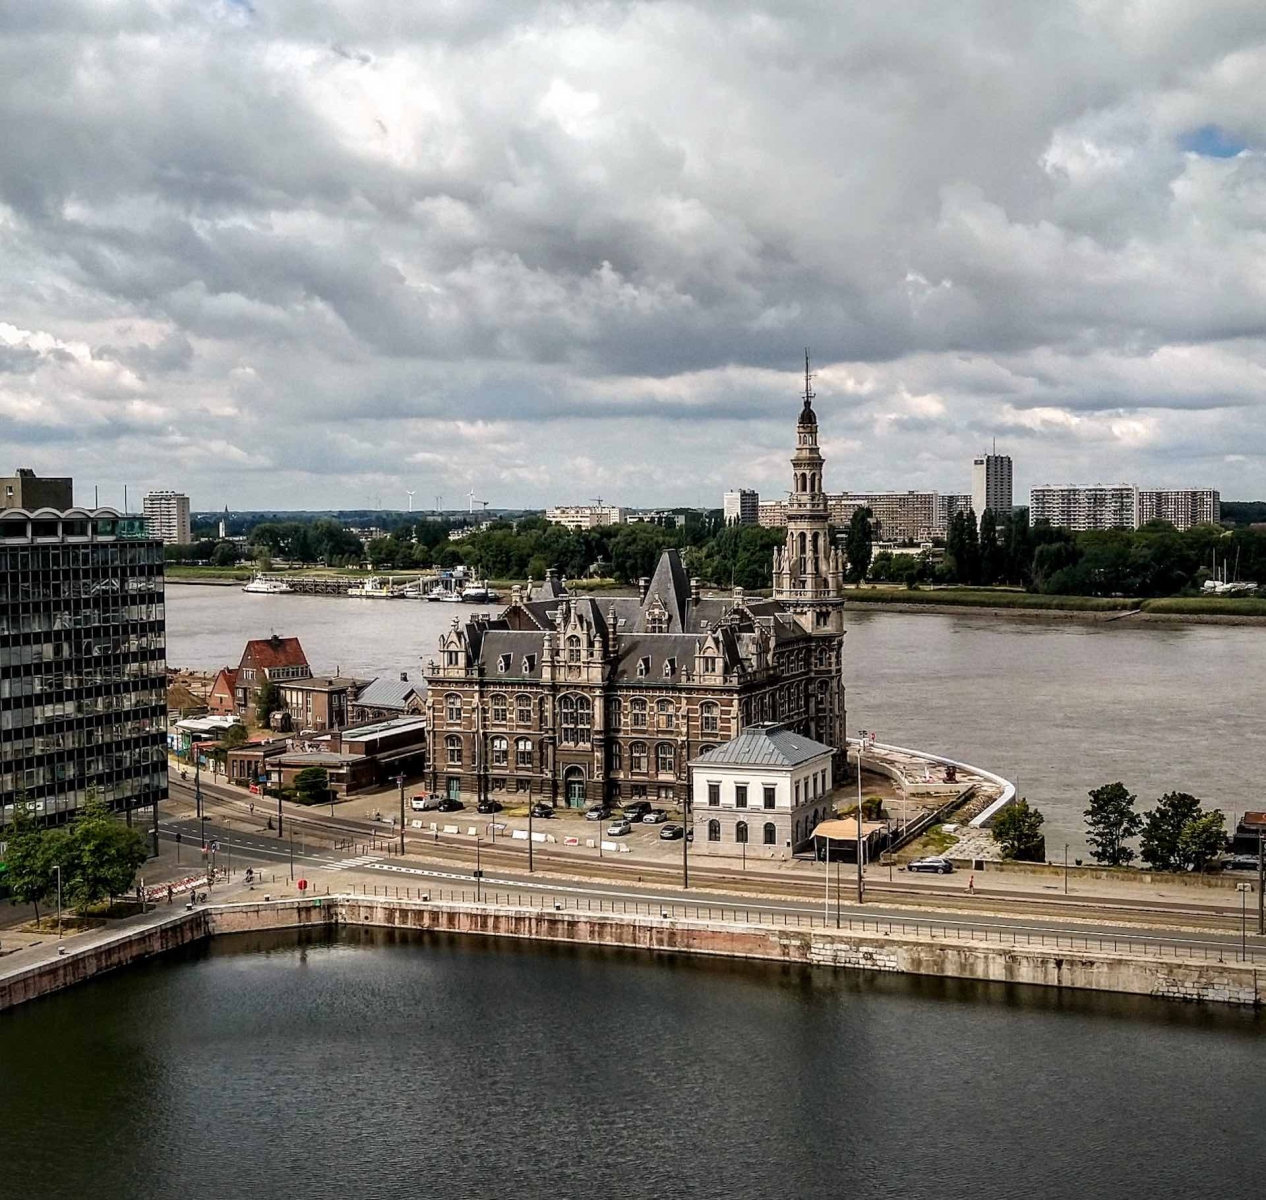 The view from the rooftop of the MAS museum in Antwerp towards the Schelde river, with the 19th Century loodswezen (pilots) building in the foreground.